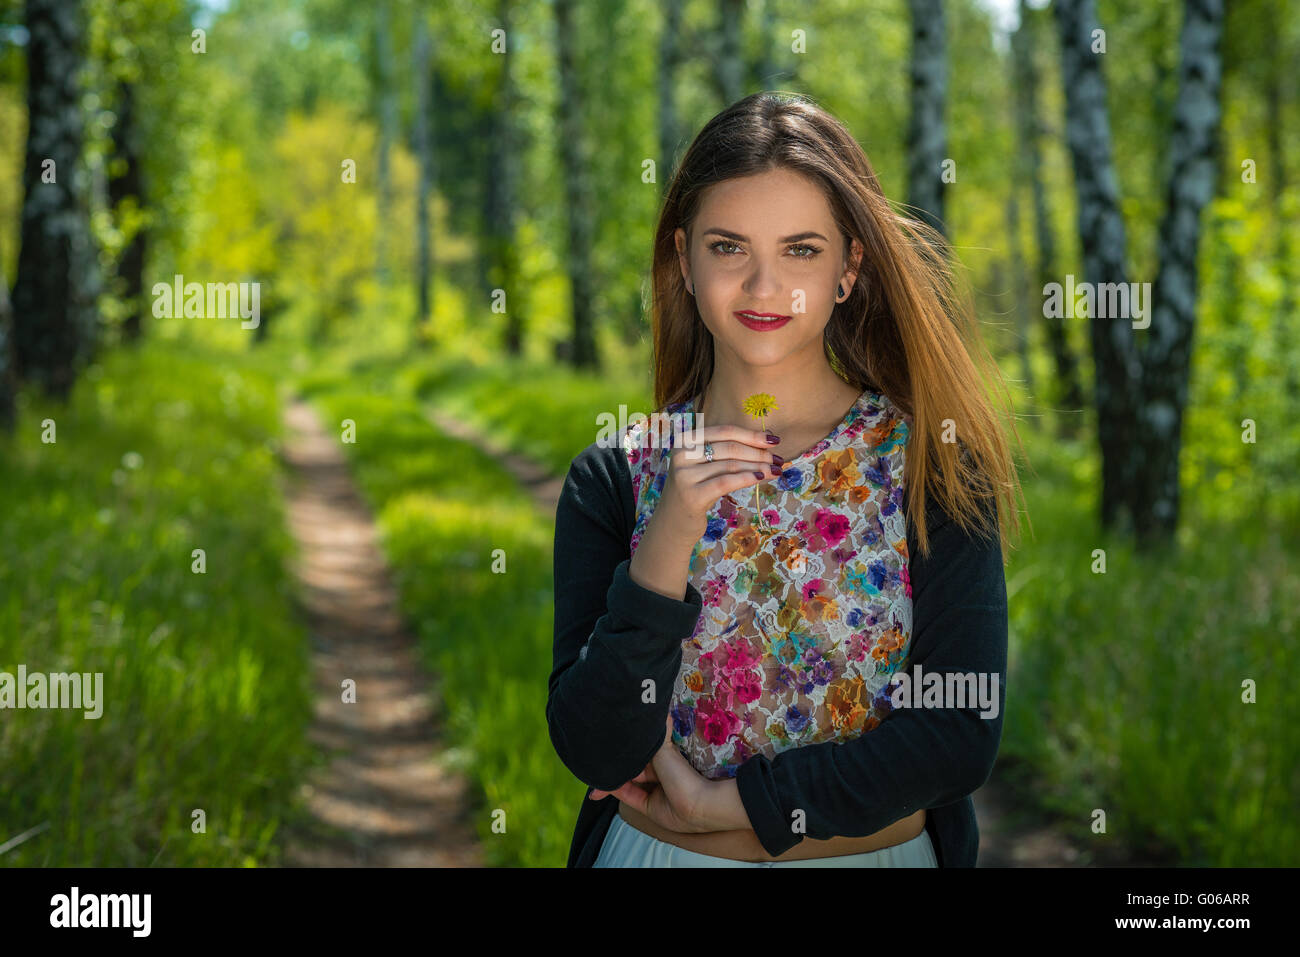 Young woman with red lips and brown hair is holding one yellow dandelion in hand while standing on a footpath in a forest during Stock Photo